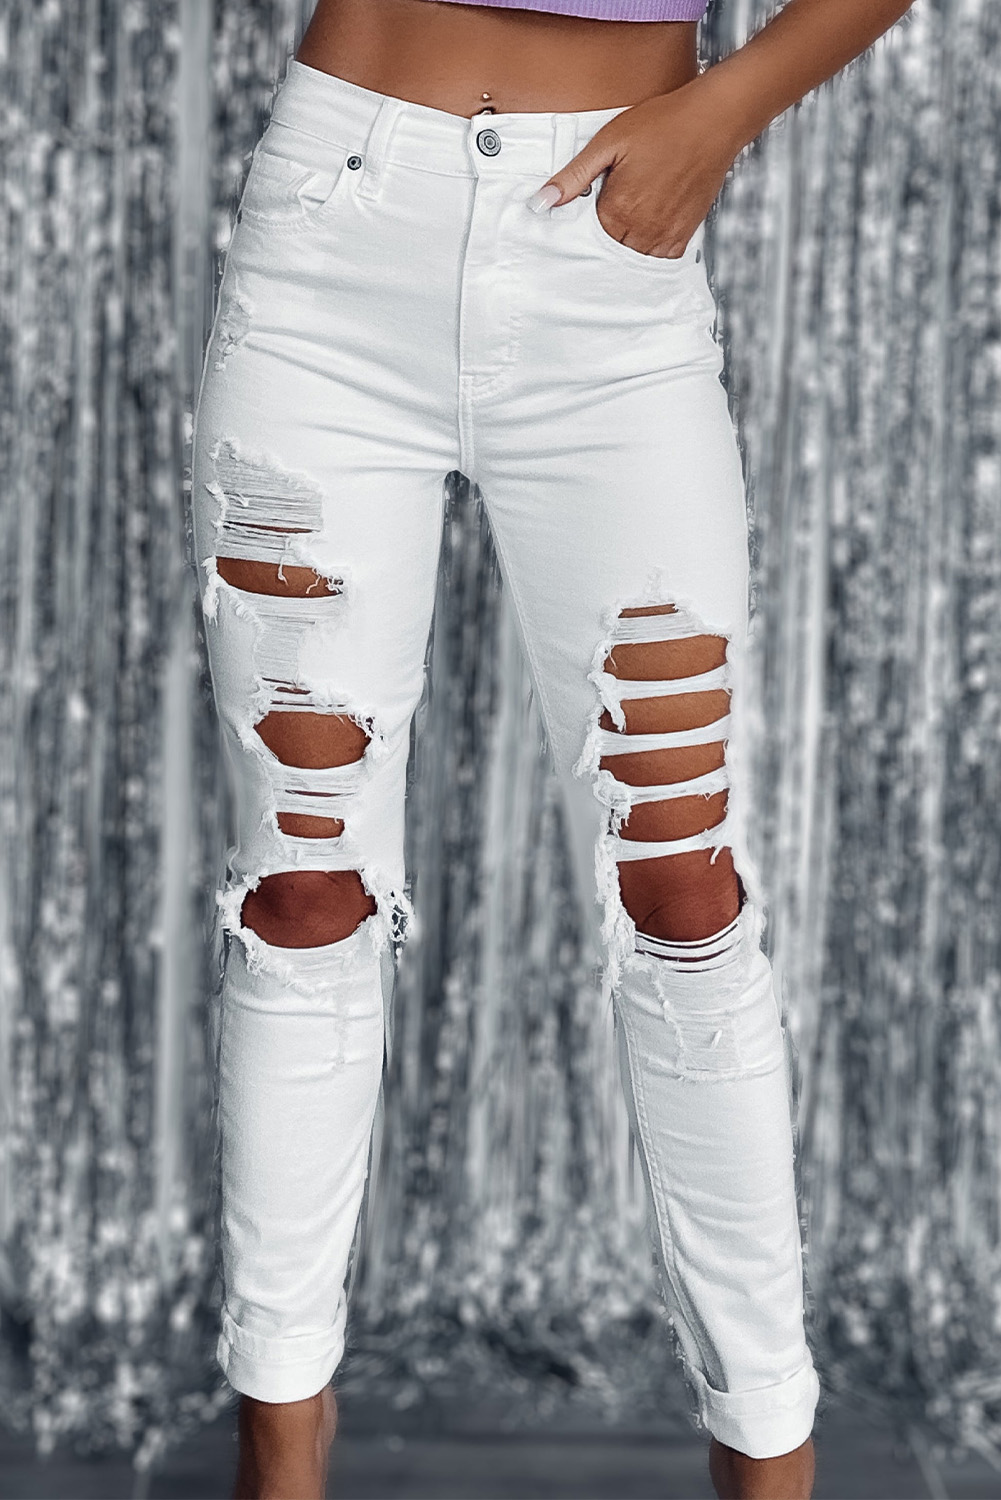 White Distressed Ripped Holes High Waist Skinny Jeans | Shewin Wholesale